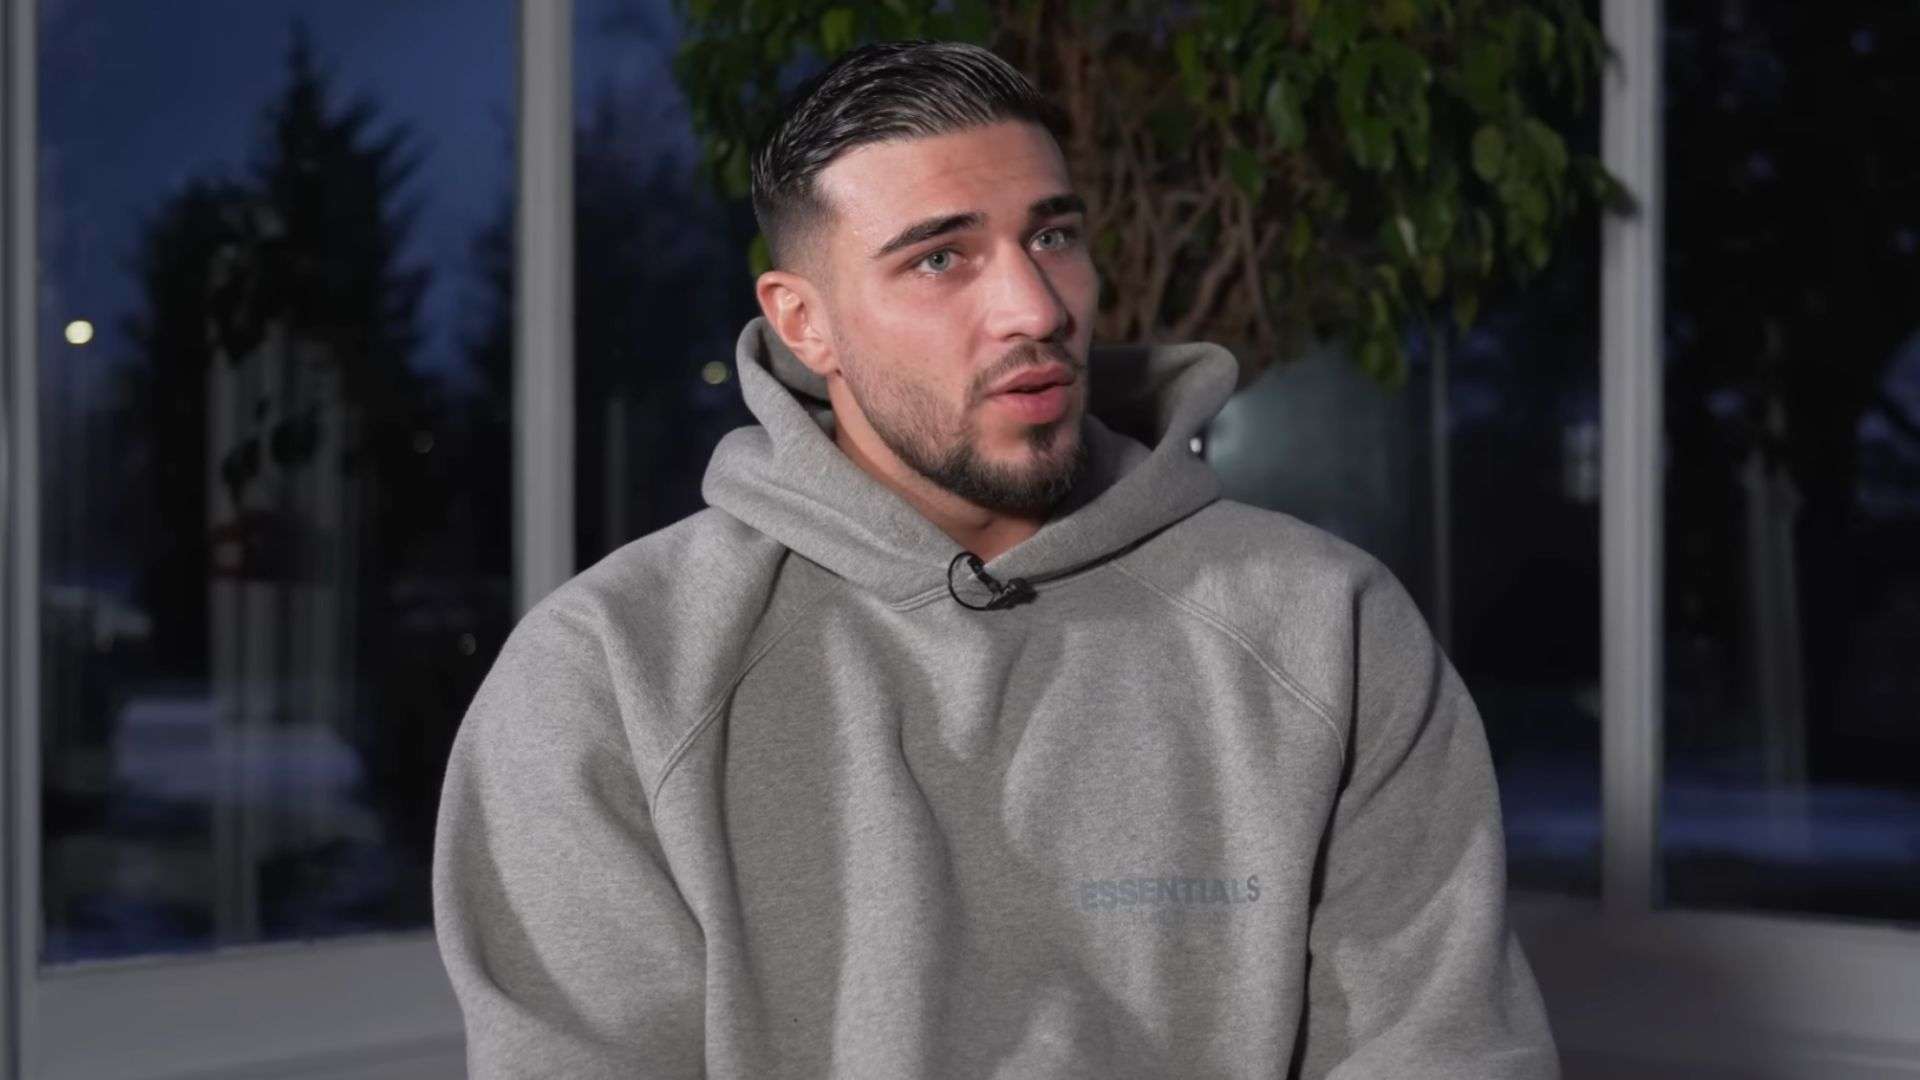 Tommy Fury in a grey jumper talking to camera